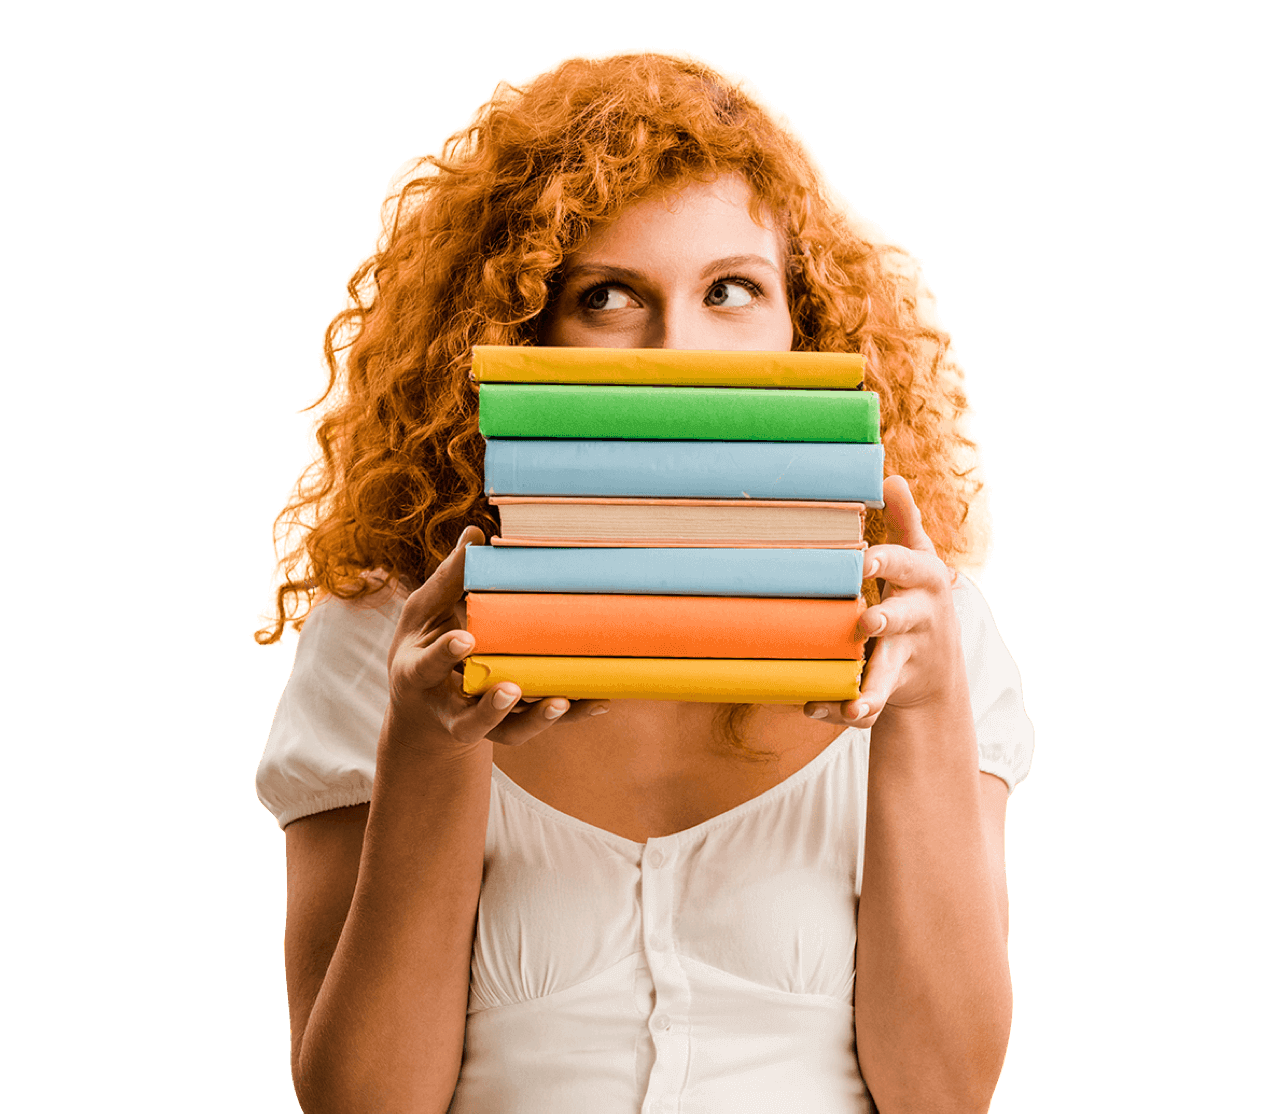 Attractive Female Student Holding Books Isolated O 2021 09 01 14 45 56 Utc Copy Ccexpress 1 1 E1652776997497.png